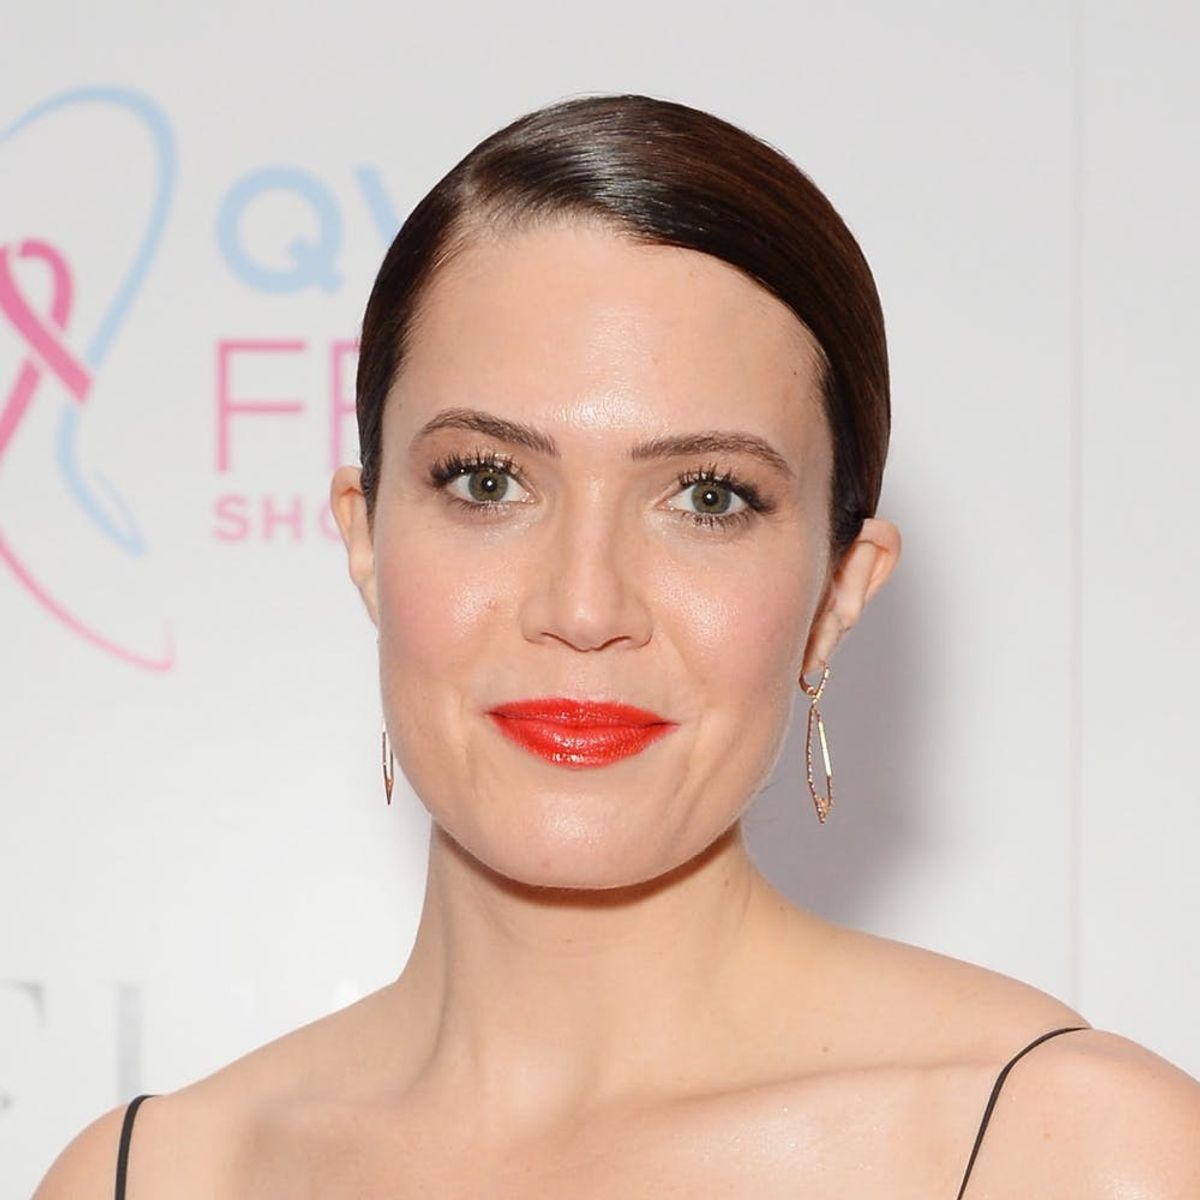 Mandy Moore Shuts Down Accusations That She Photoshops Her Instagram Pics